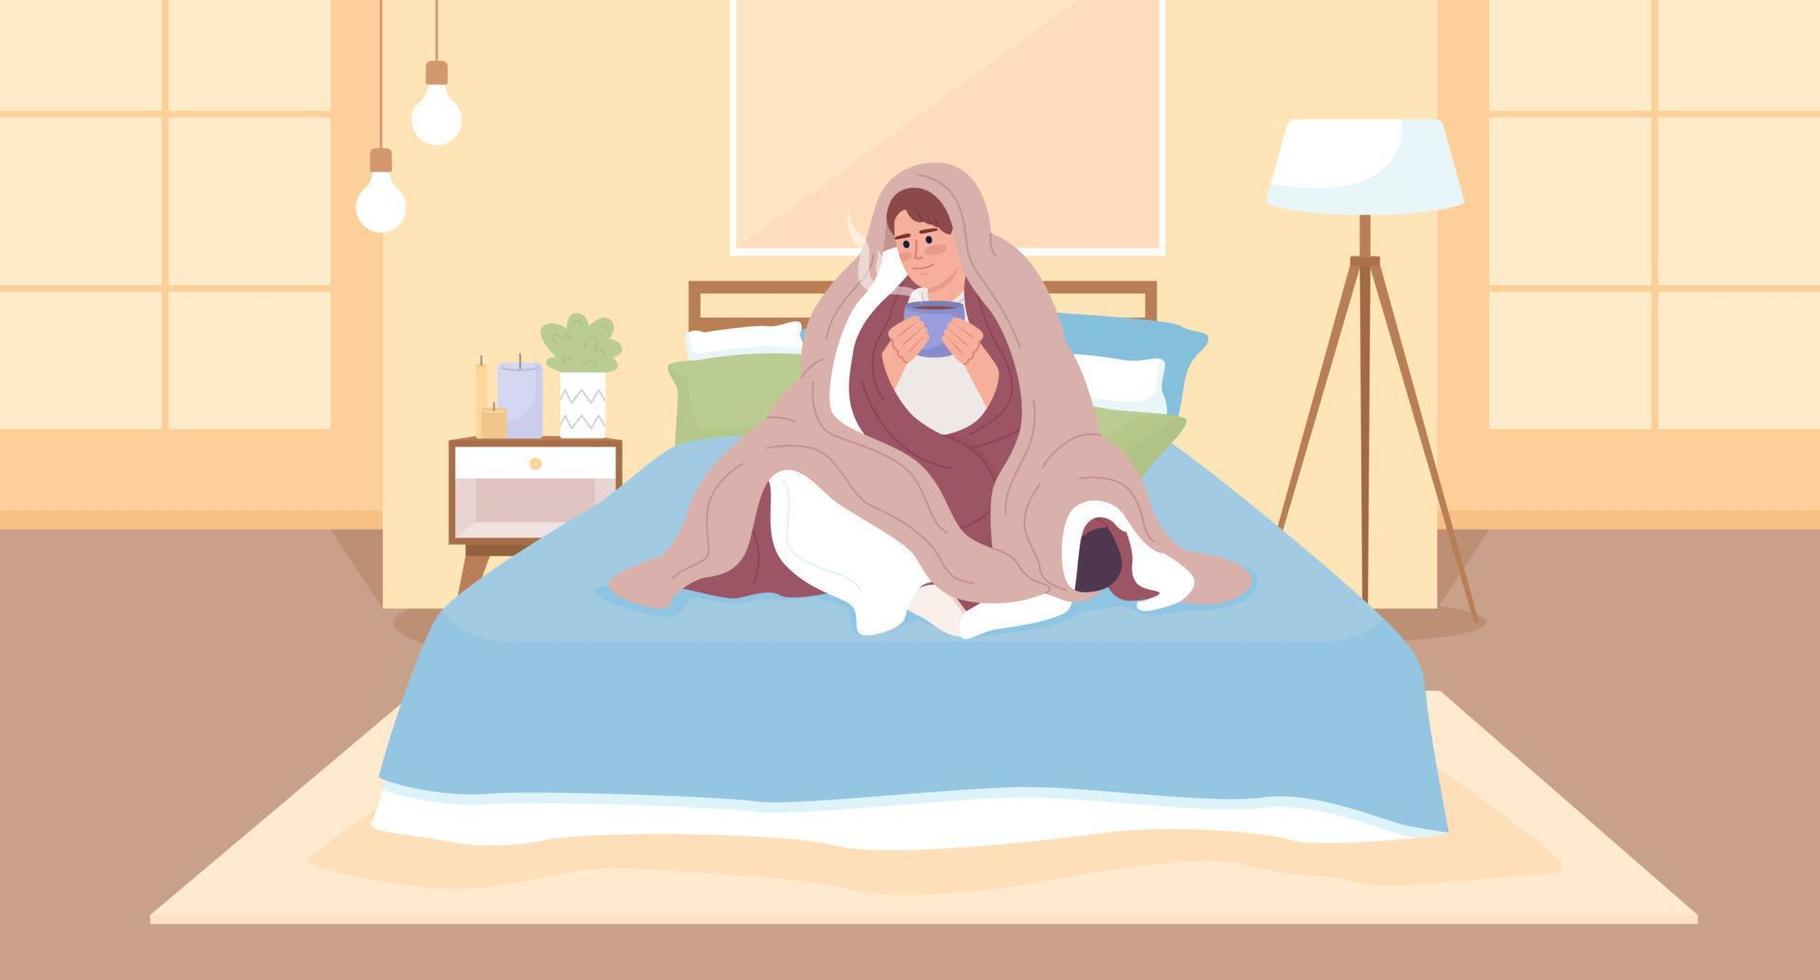 Using more blankets for getting warm in cold weather flat color vector illustration. Save energy. Hero image. Fully editable 2D simple cartoon characters with cozy bedroom interior on background